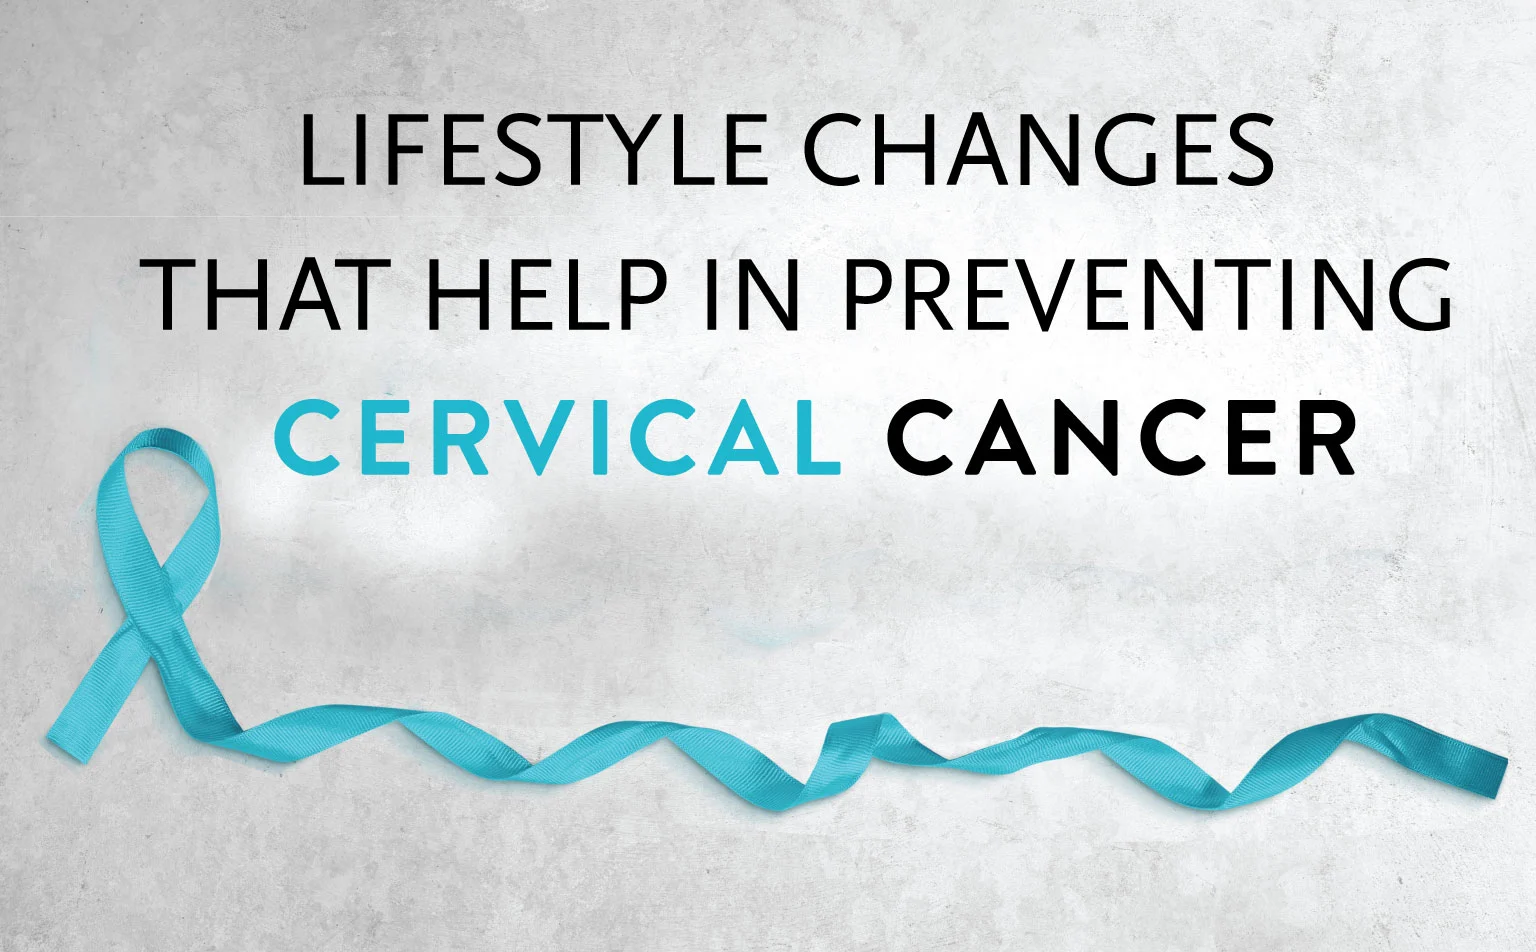 Lifestyle Changes that Help in Preventing Cervical Cancer